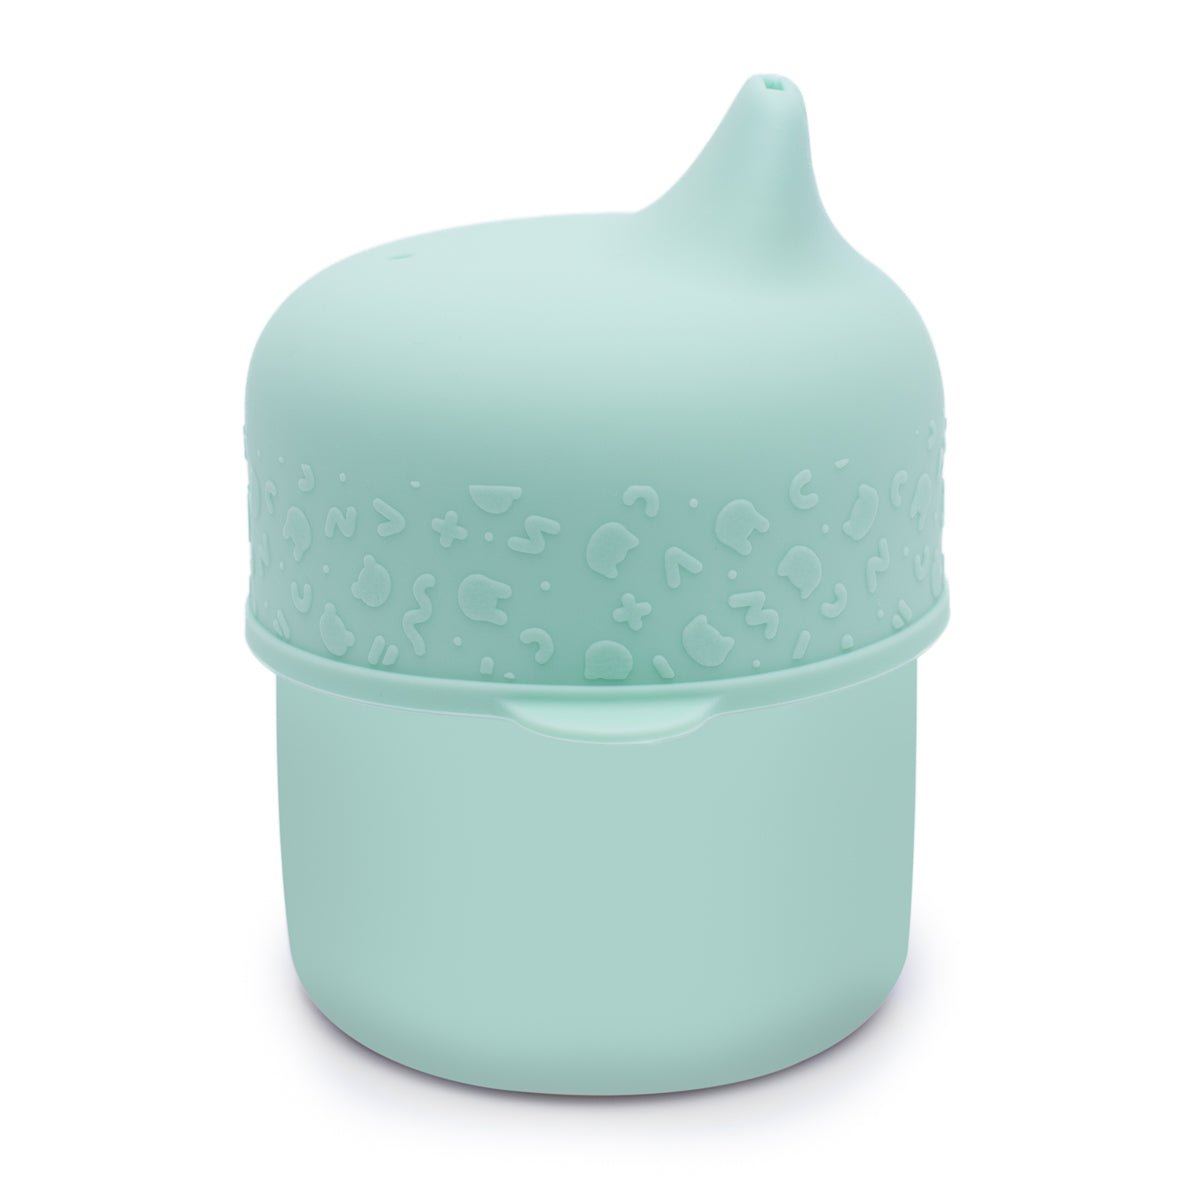 Sippie Cup Set in Mint Without Straw